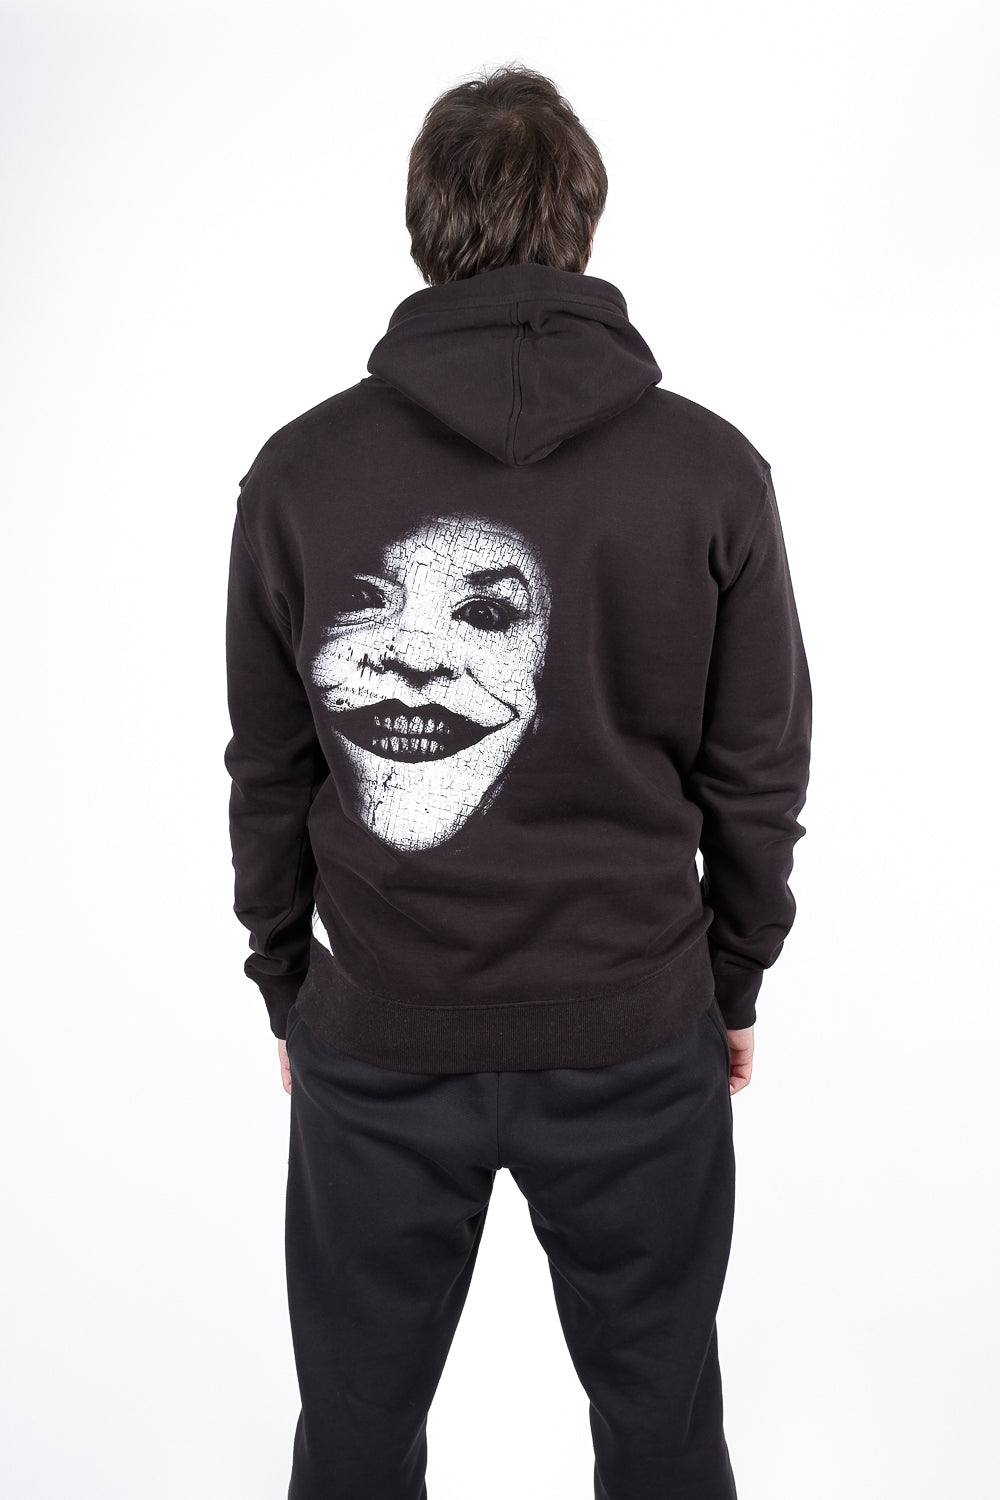 Buy the ABE Joker 2.0 Hoodie Black at Intro. Spend £50 for free UK delivery. Official stockists. We ship worldwide.